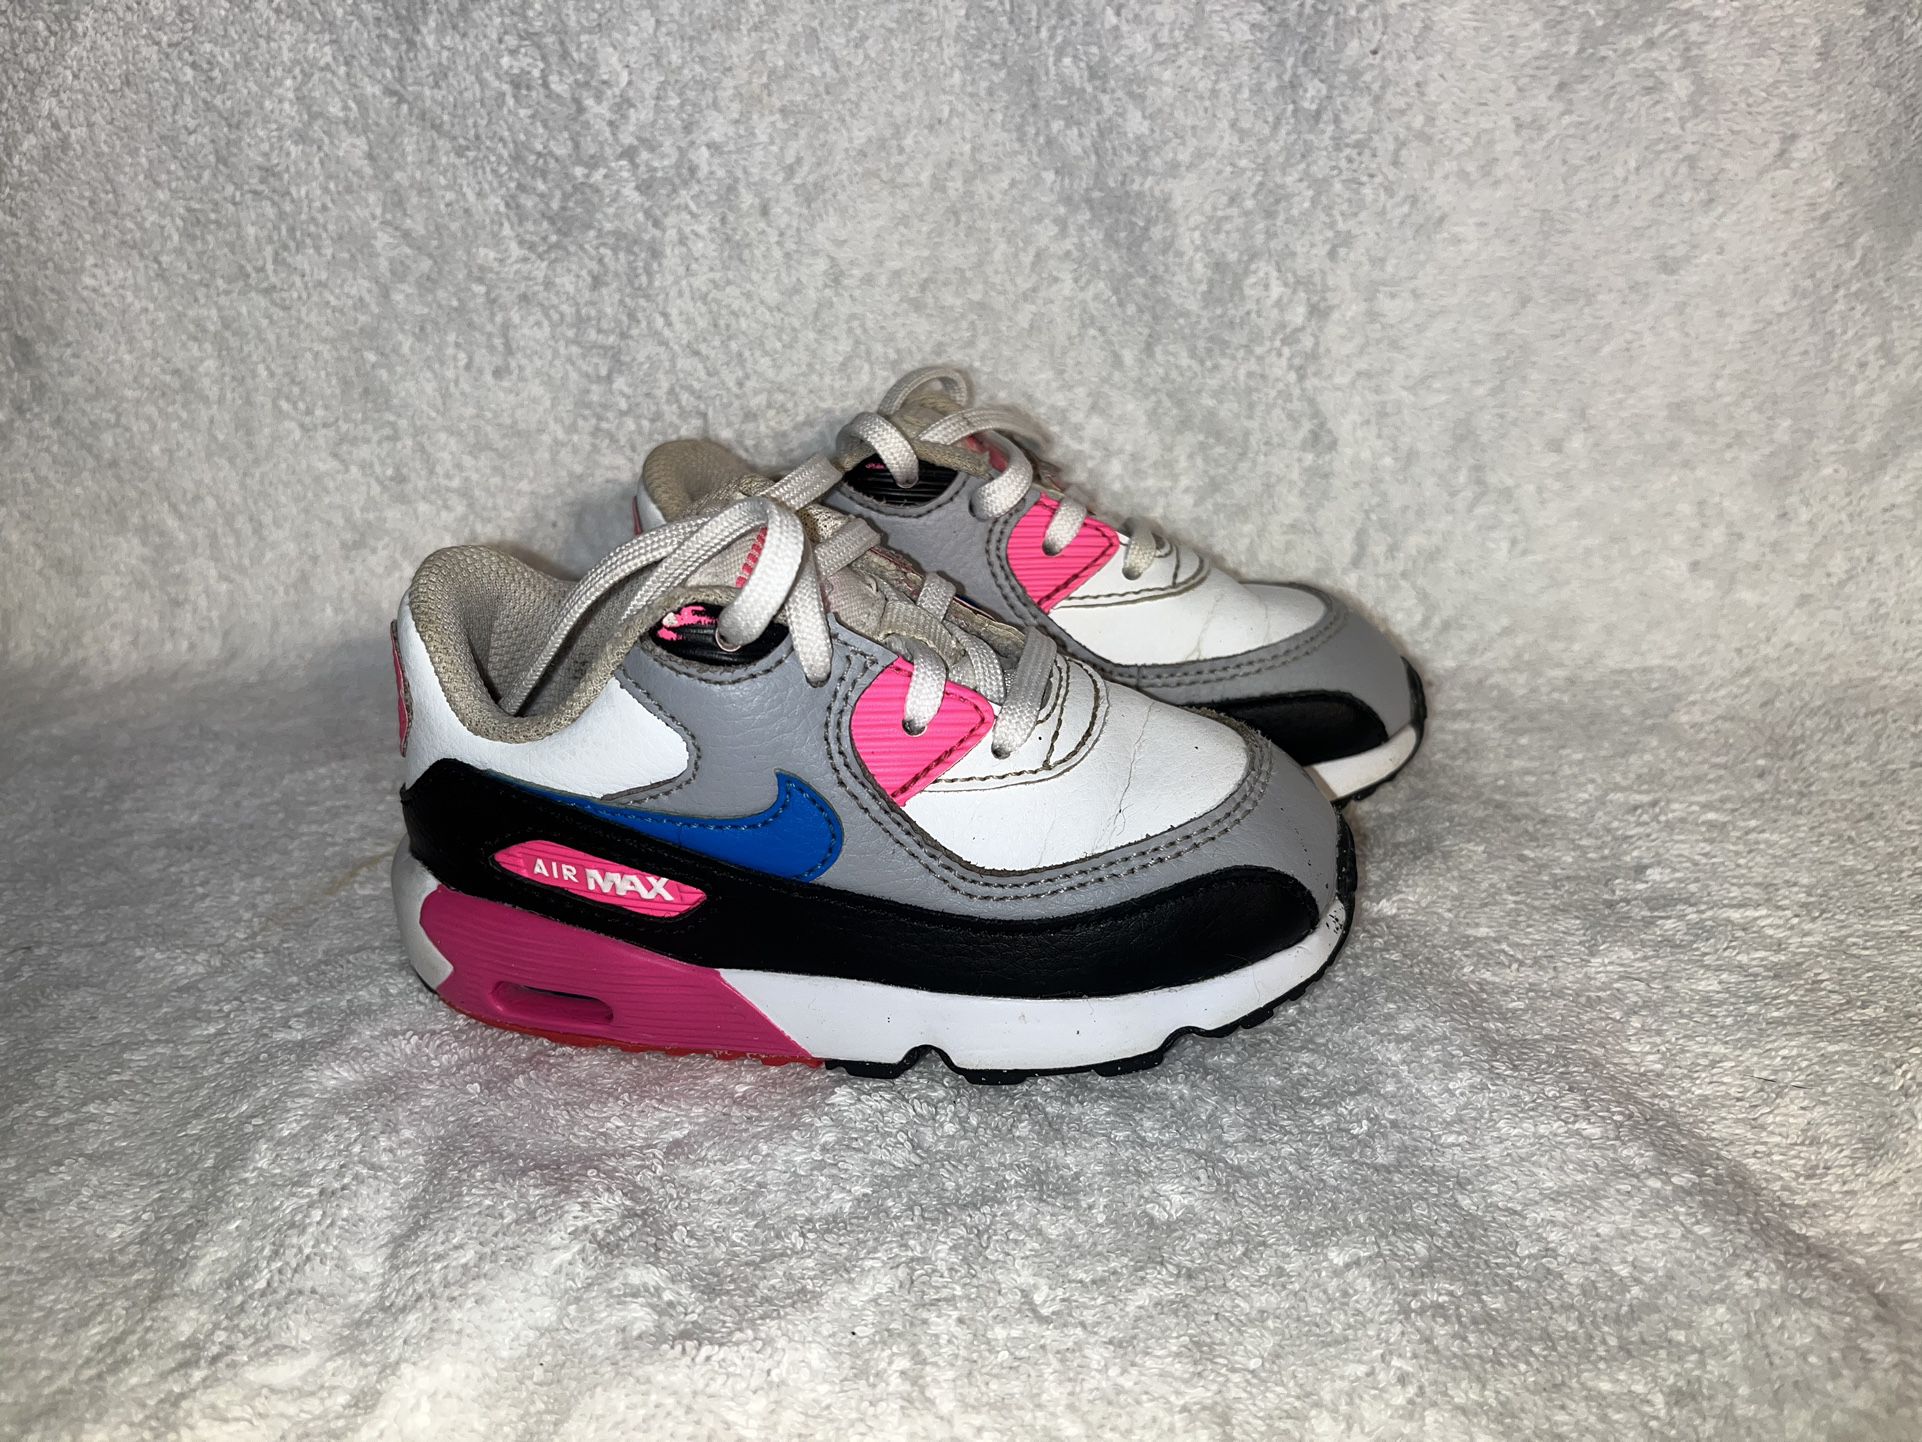 Prnding NIKE AIR MAX 833379-10 SNEAKERS BLACK/PINK /BLUE / GREY/WHITE  BABY TODDLERS SIZE 7